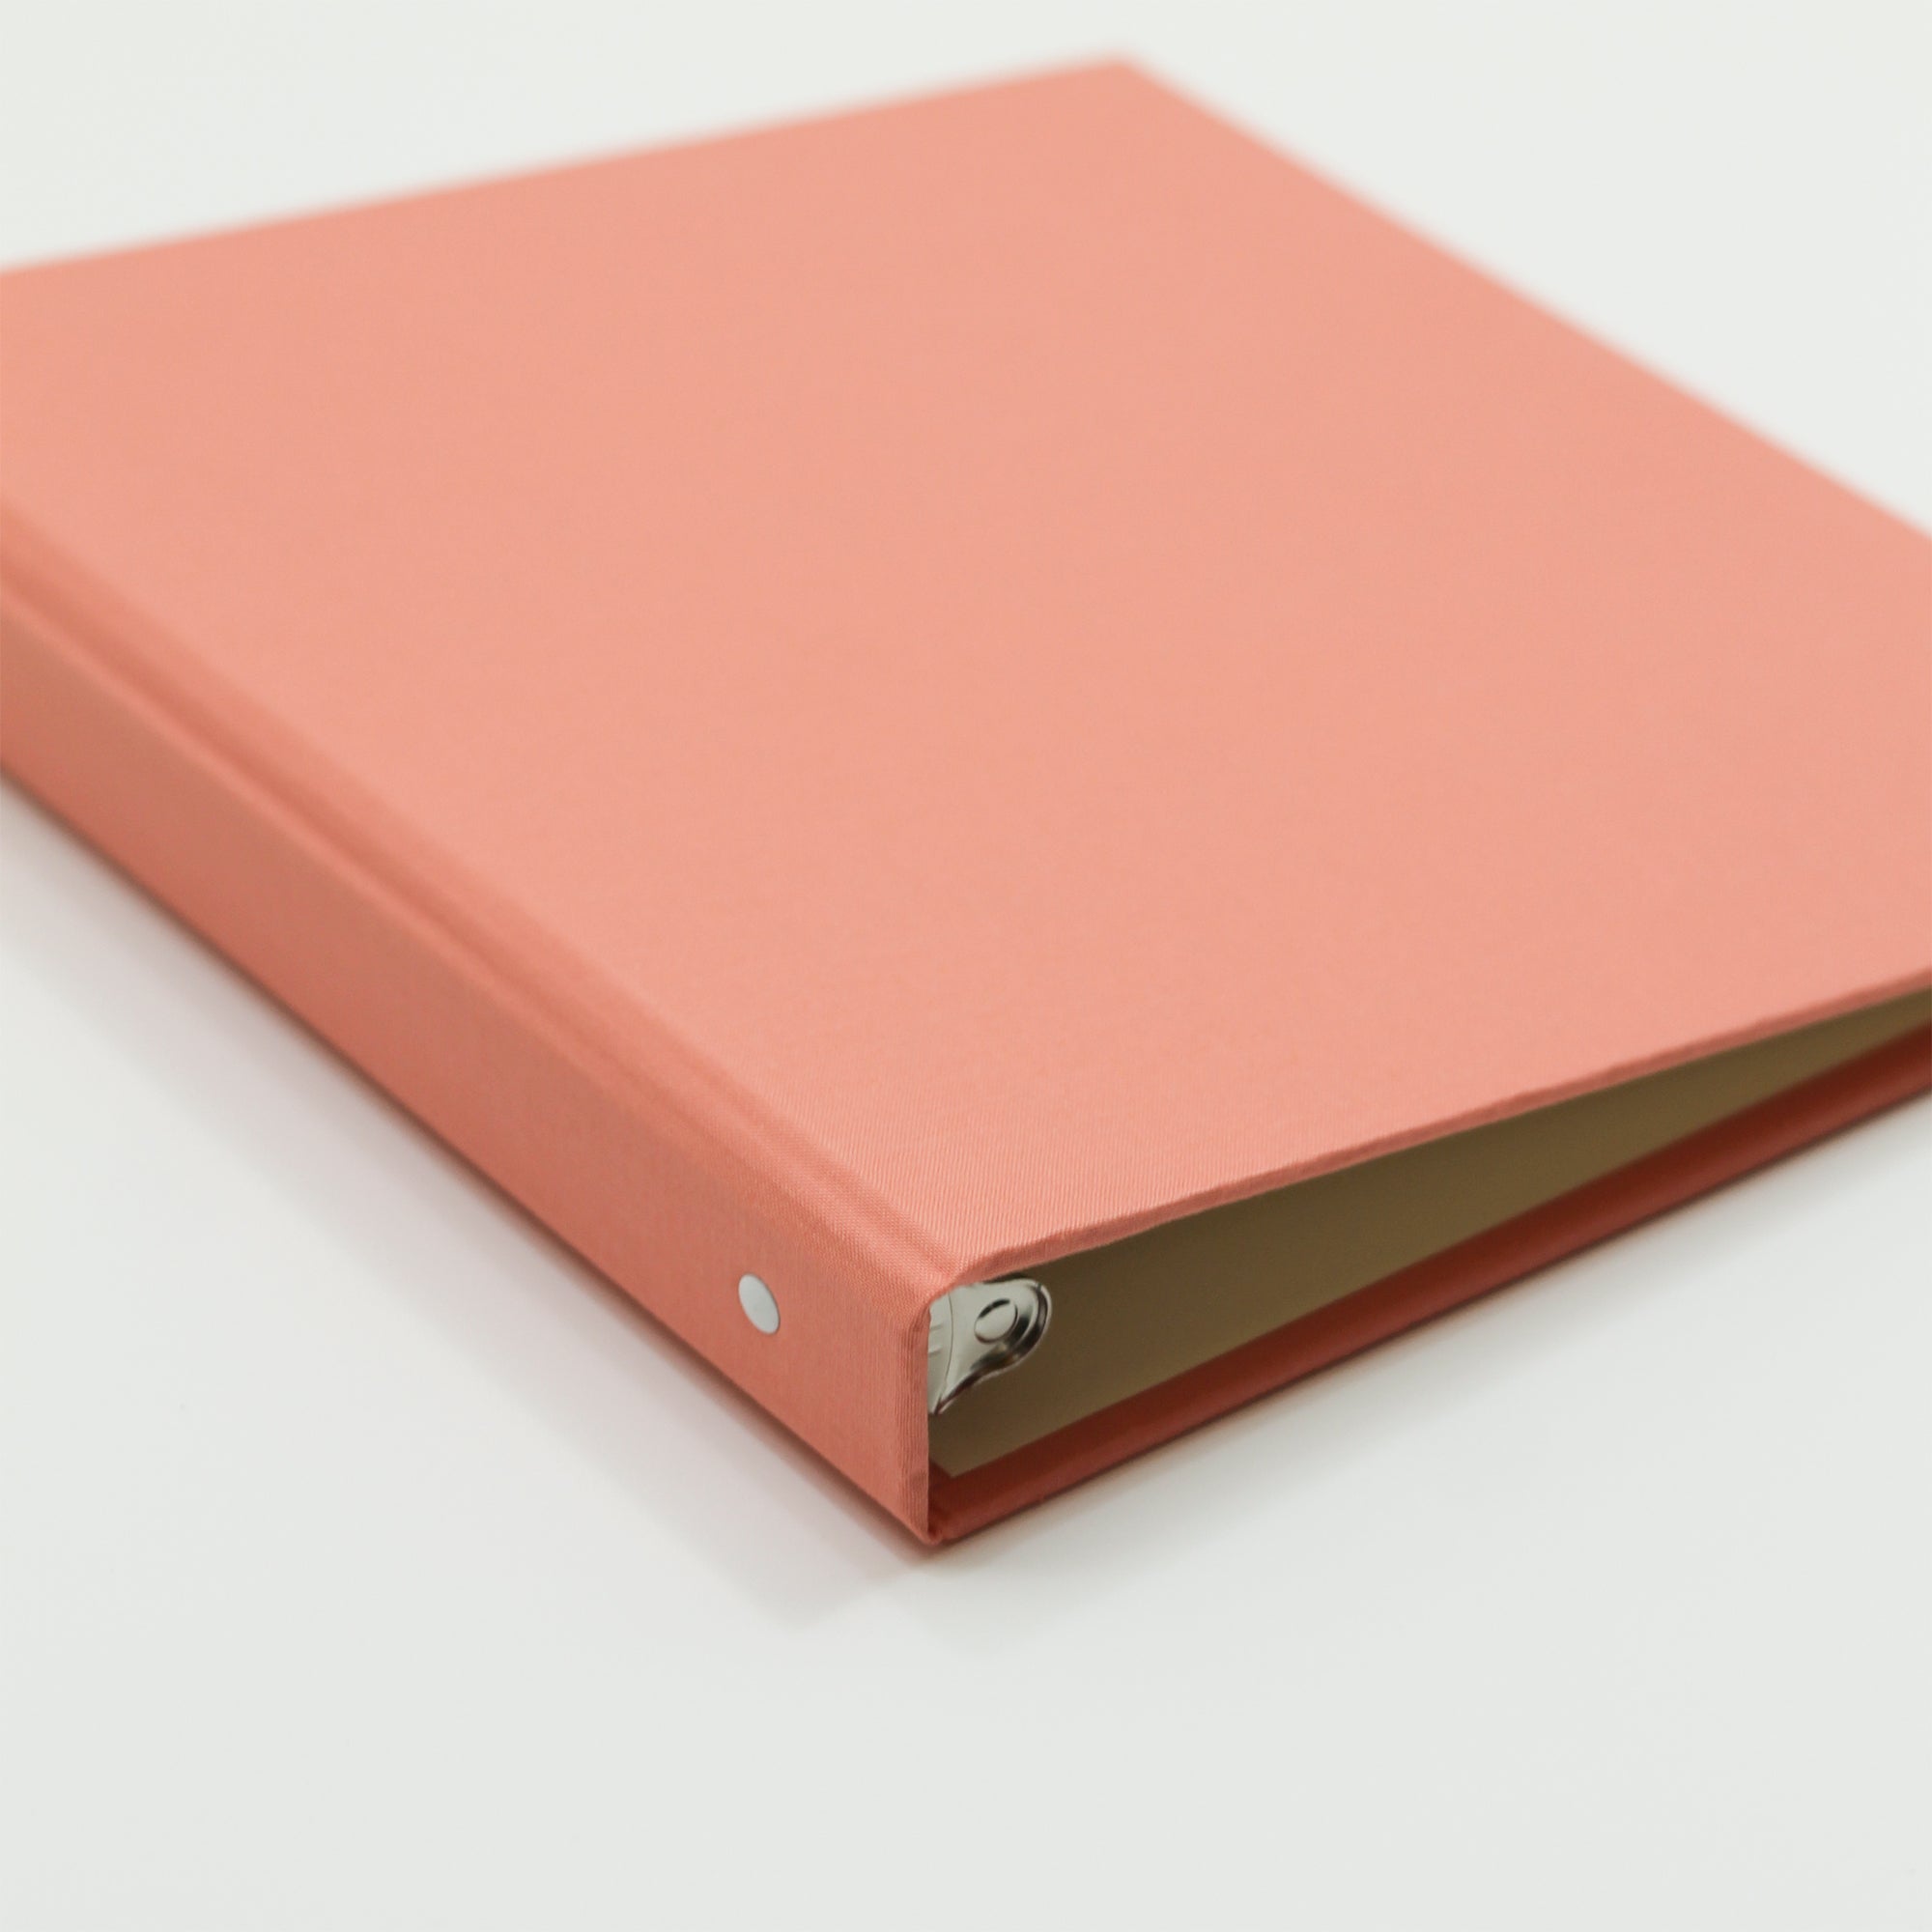 Large Photo Binder (for 4x6 photos) with Coral Cotton Cover - Rag & Bone  Bindery